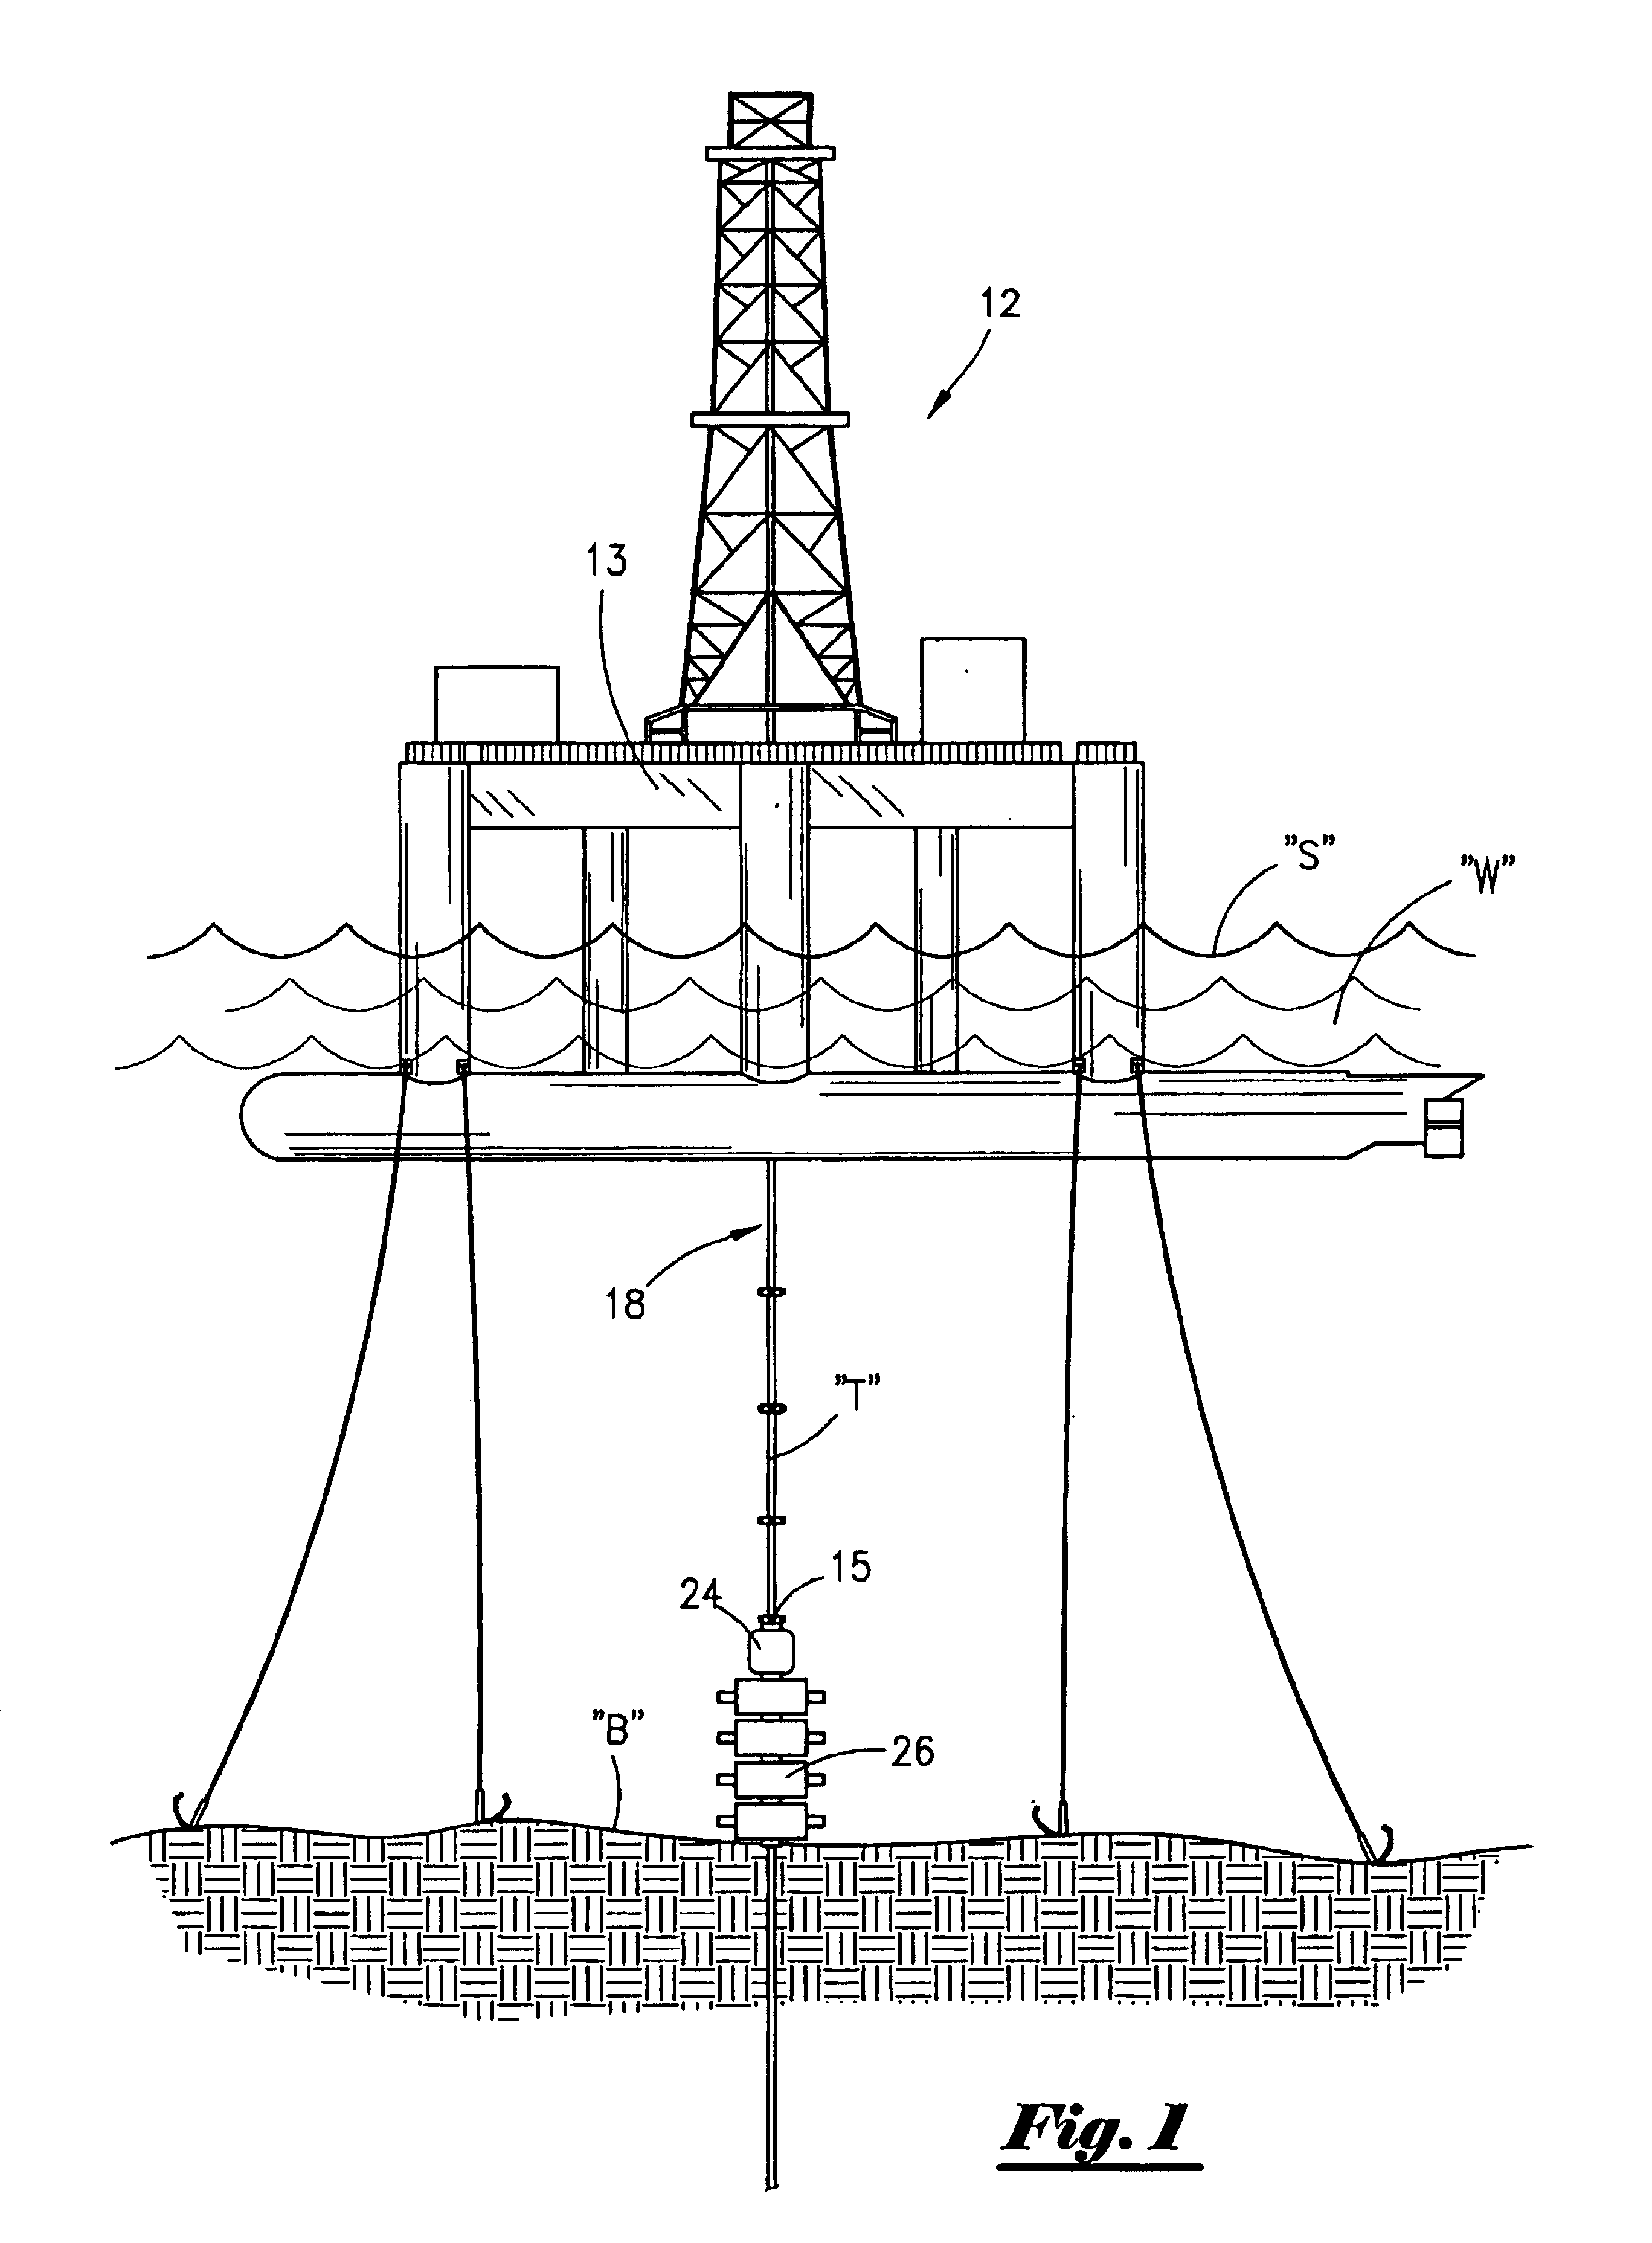 Method and apparatus for controlling well pressure while undergoing subsea wireline operations